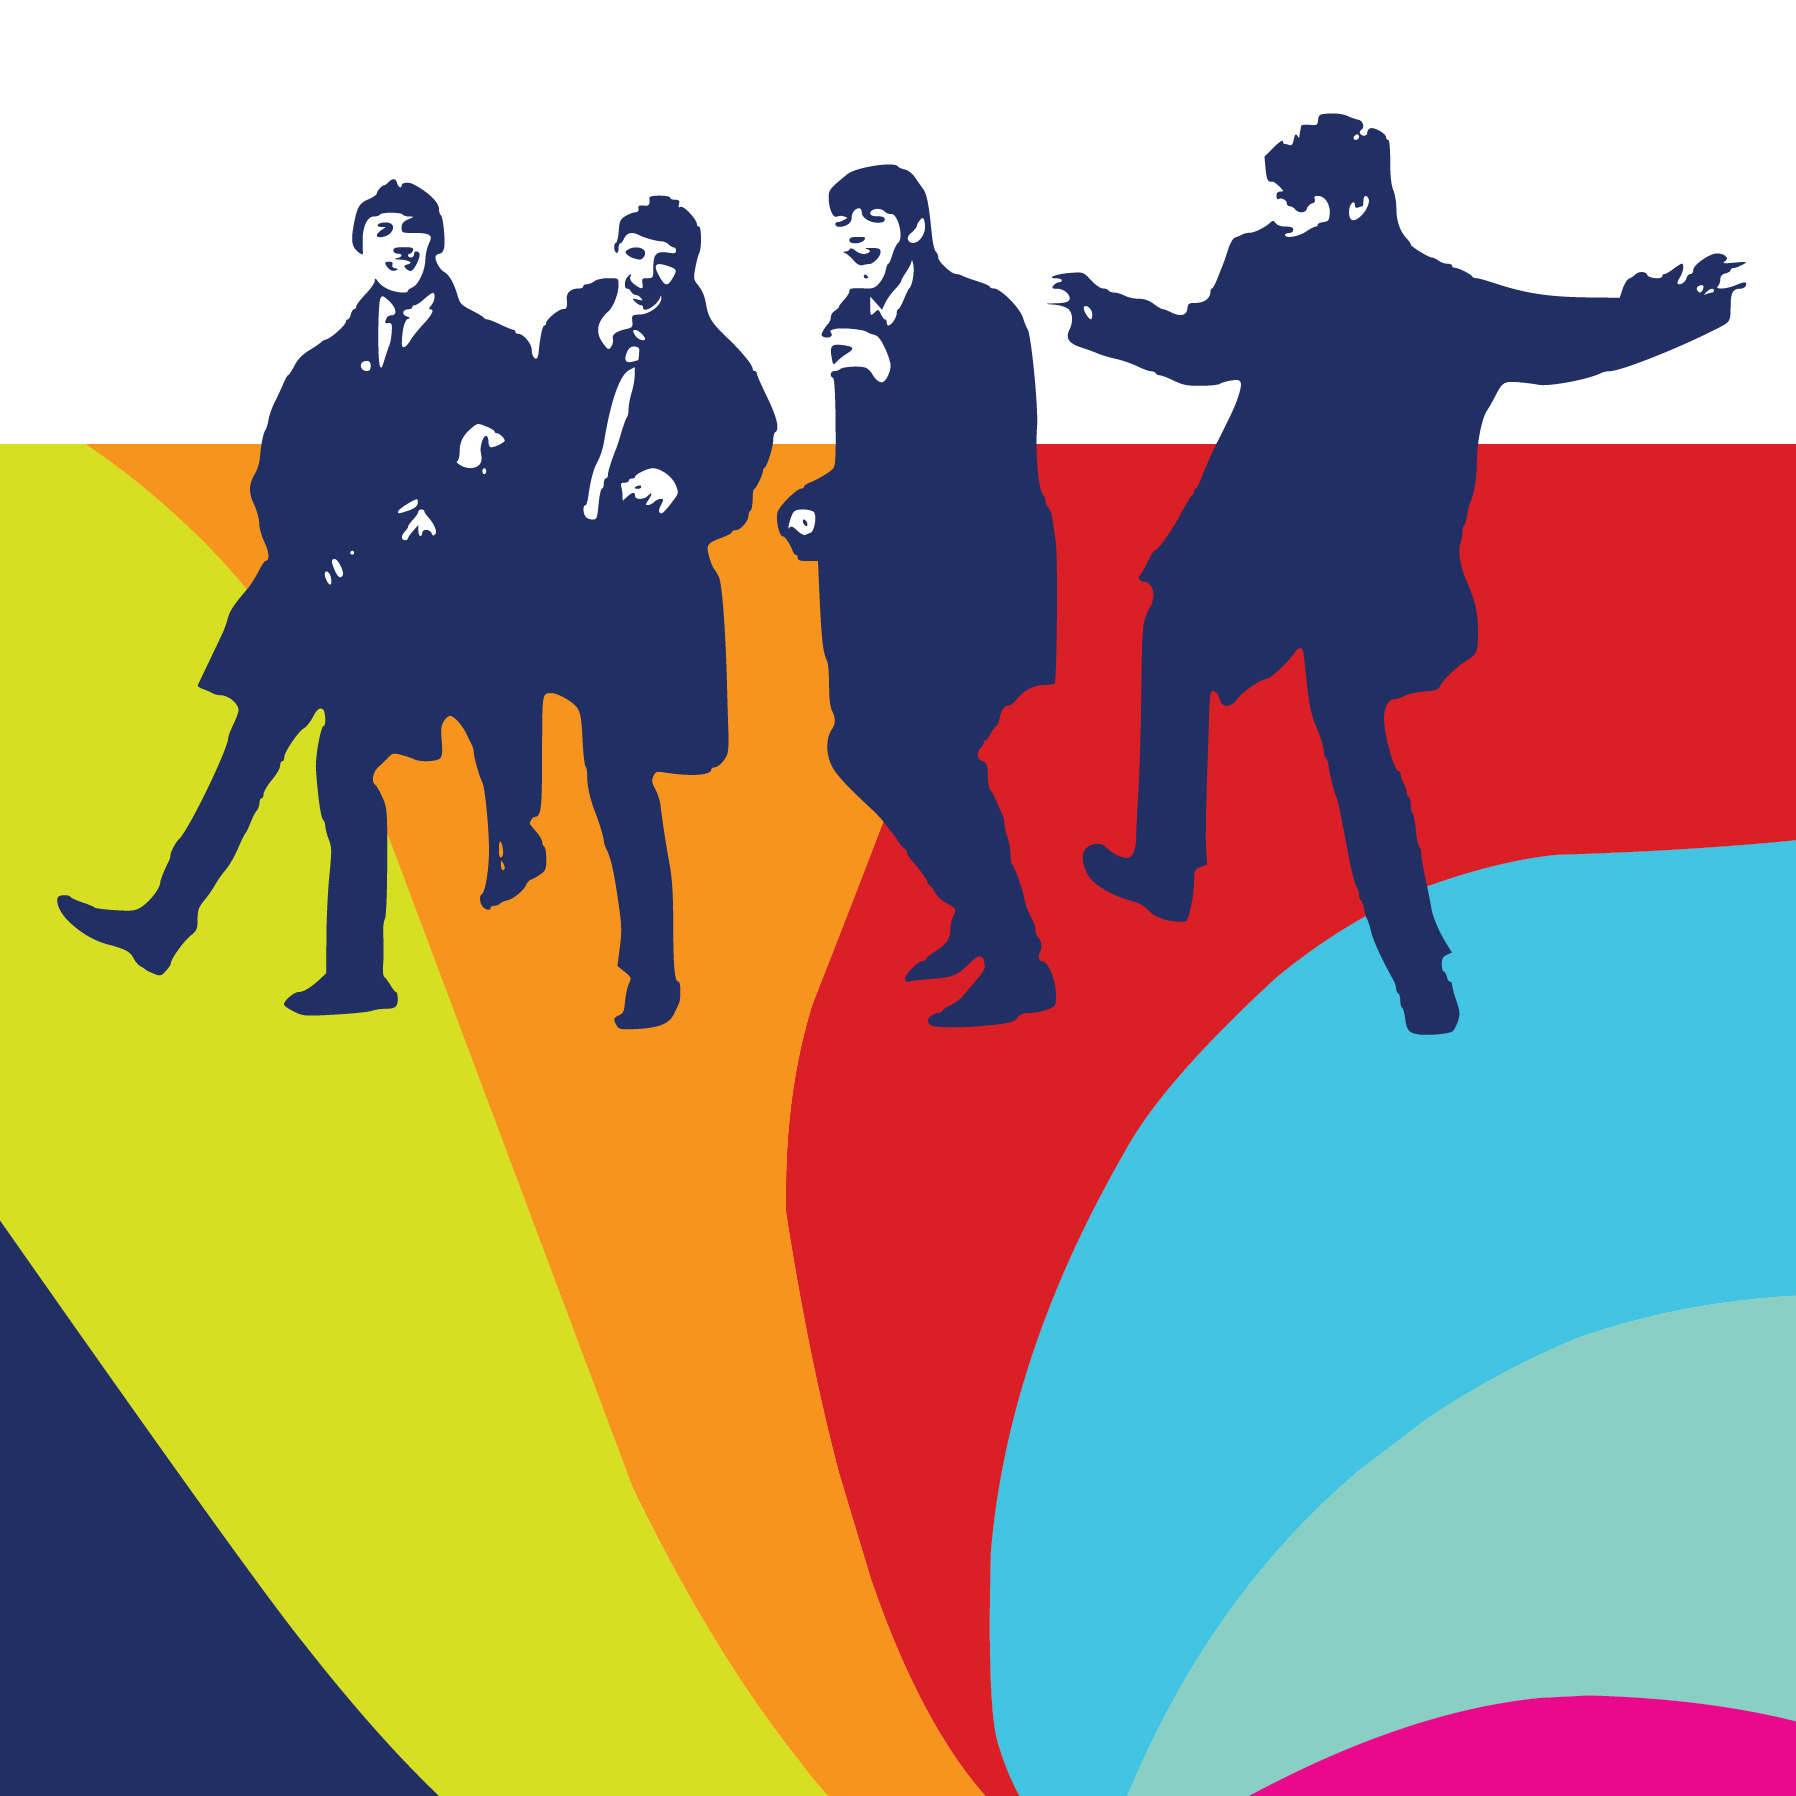 Beatles members on a coloful wavy background